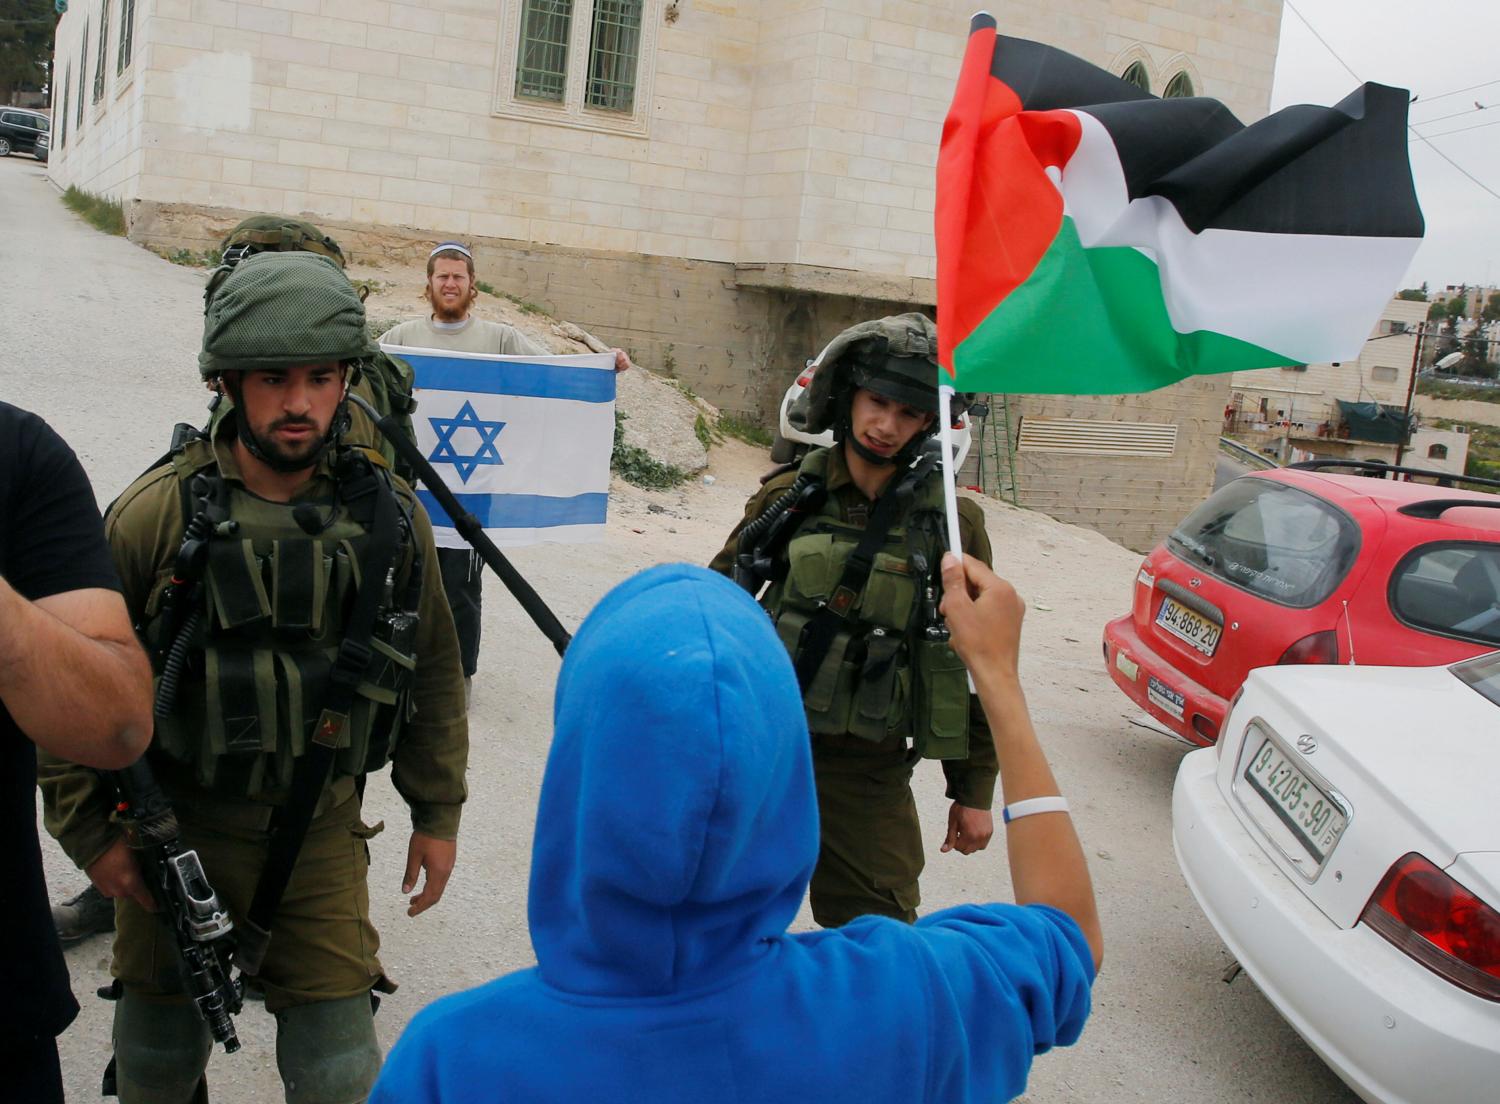 Demonstrator holds a Palestinian flag in front of Israeli troops during a protest marking Land Day in the West Bank city of Hebron